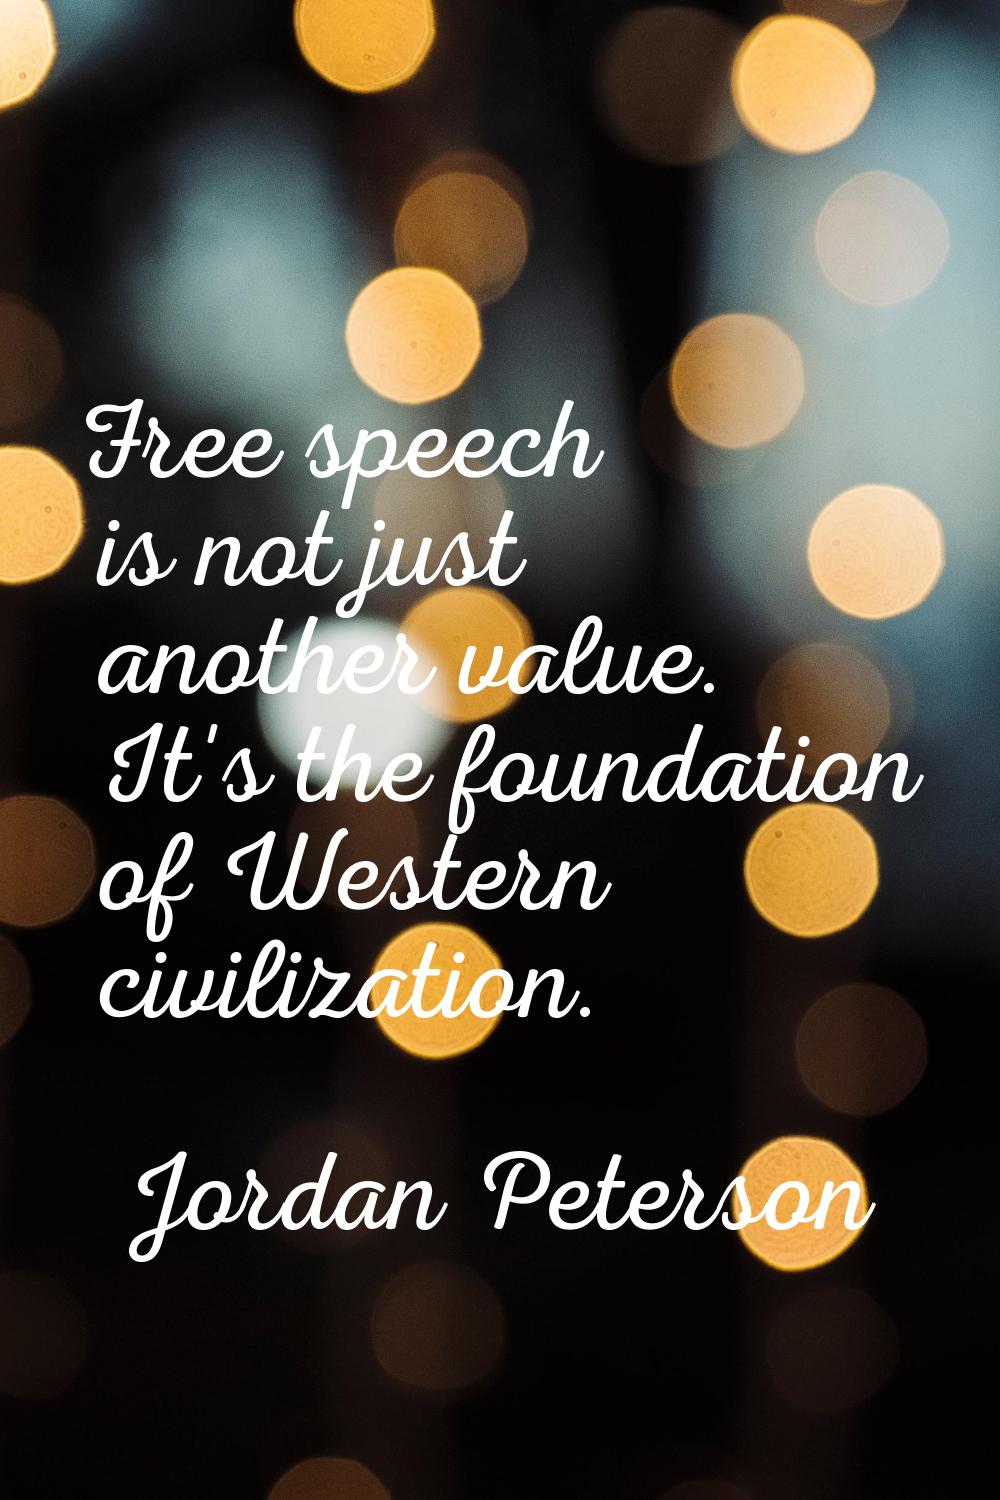 Free speech is not just another value. It's the foundation of Western civilization.